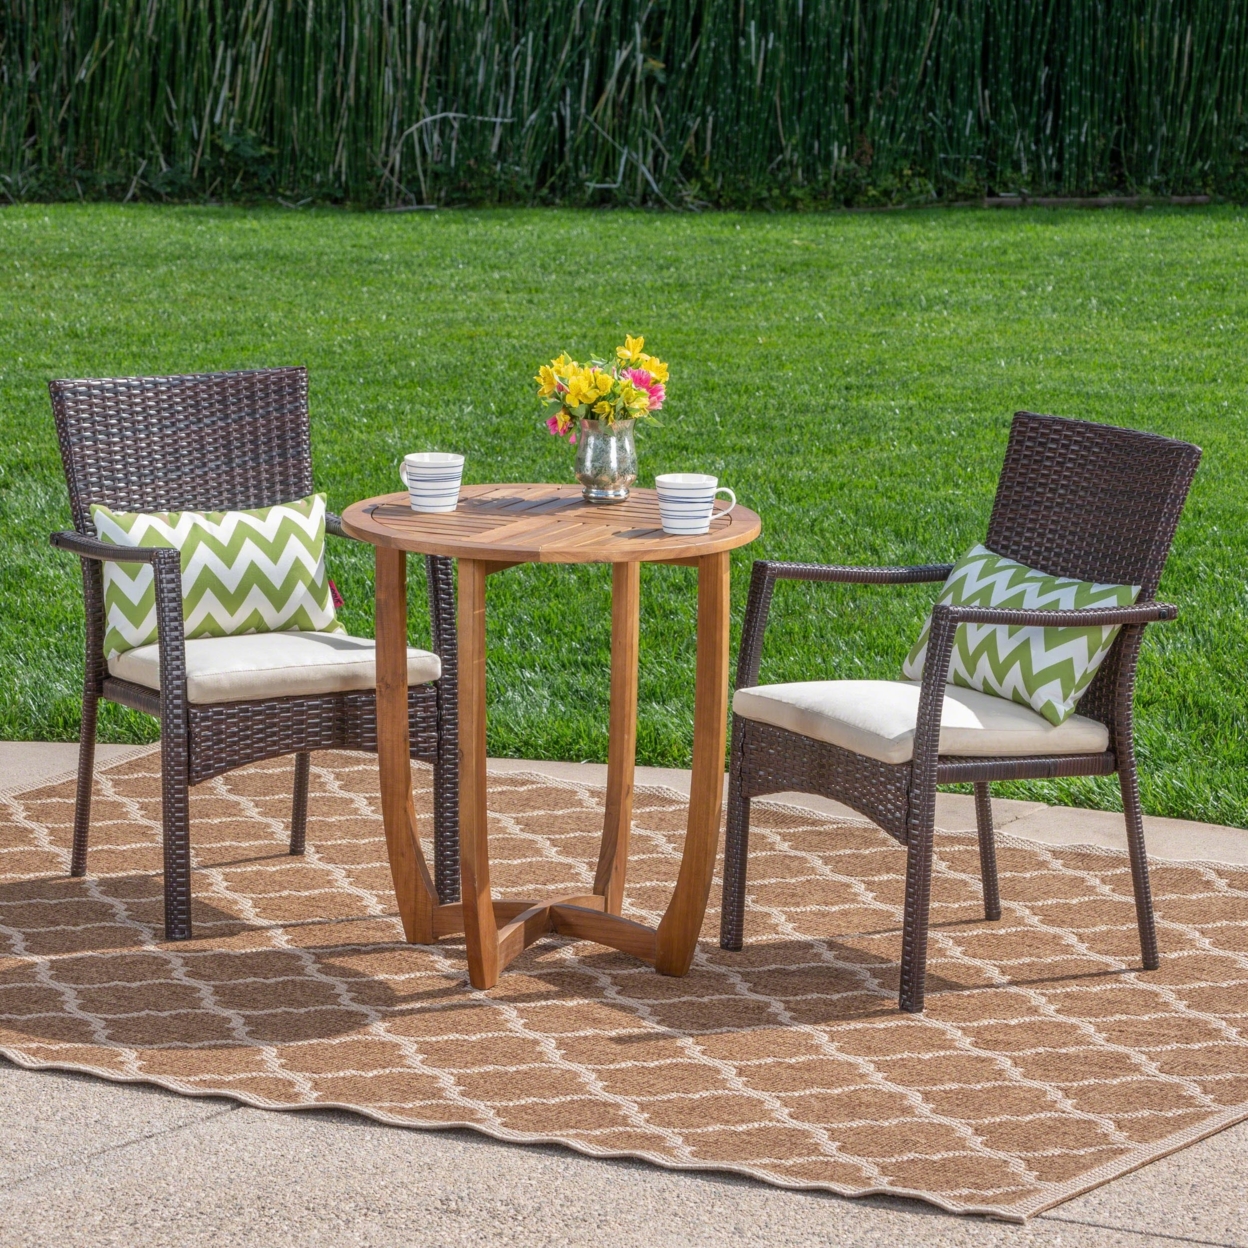 Alex Outdoor 3 Piece Acacia Wood/ Wicker Bistro Set With Cushions, Teak Finish And Brown With CrÌ¬me